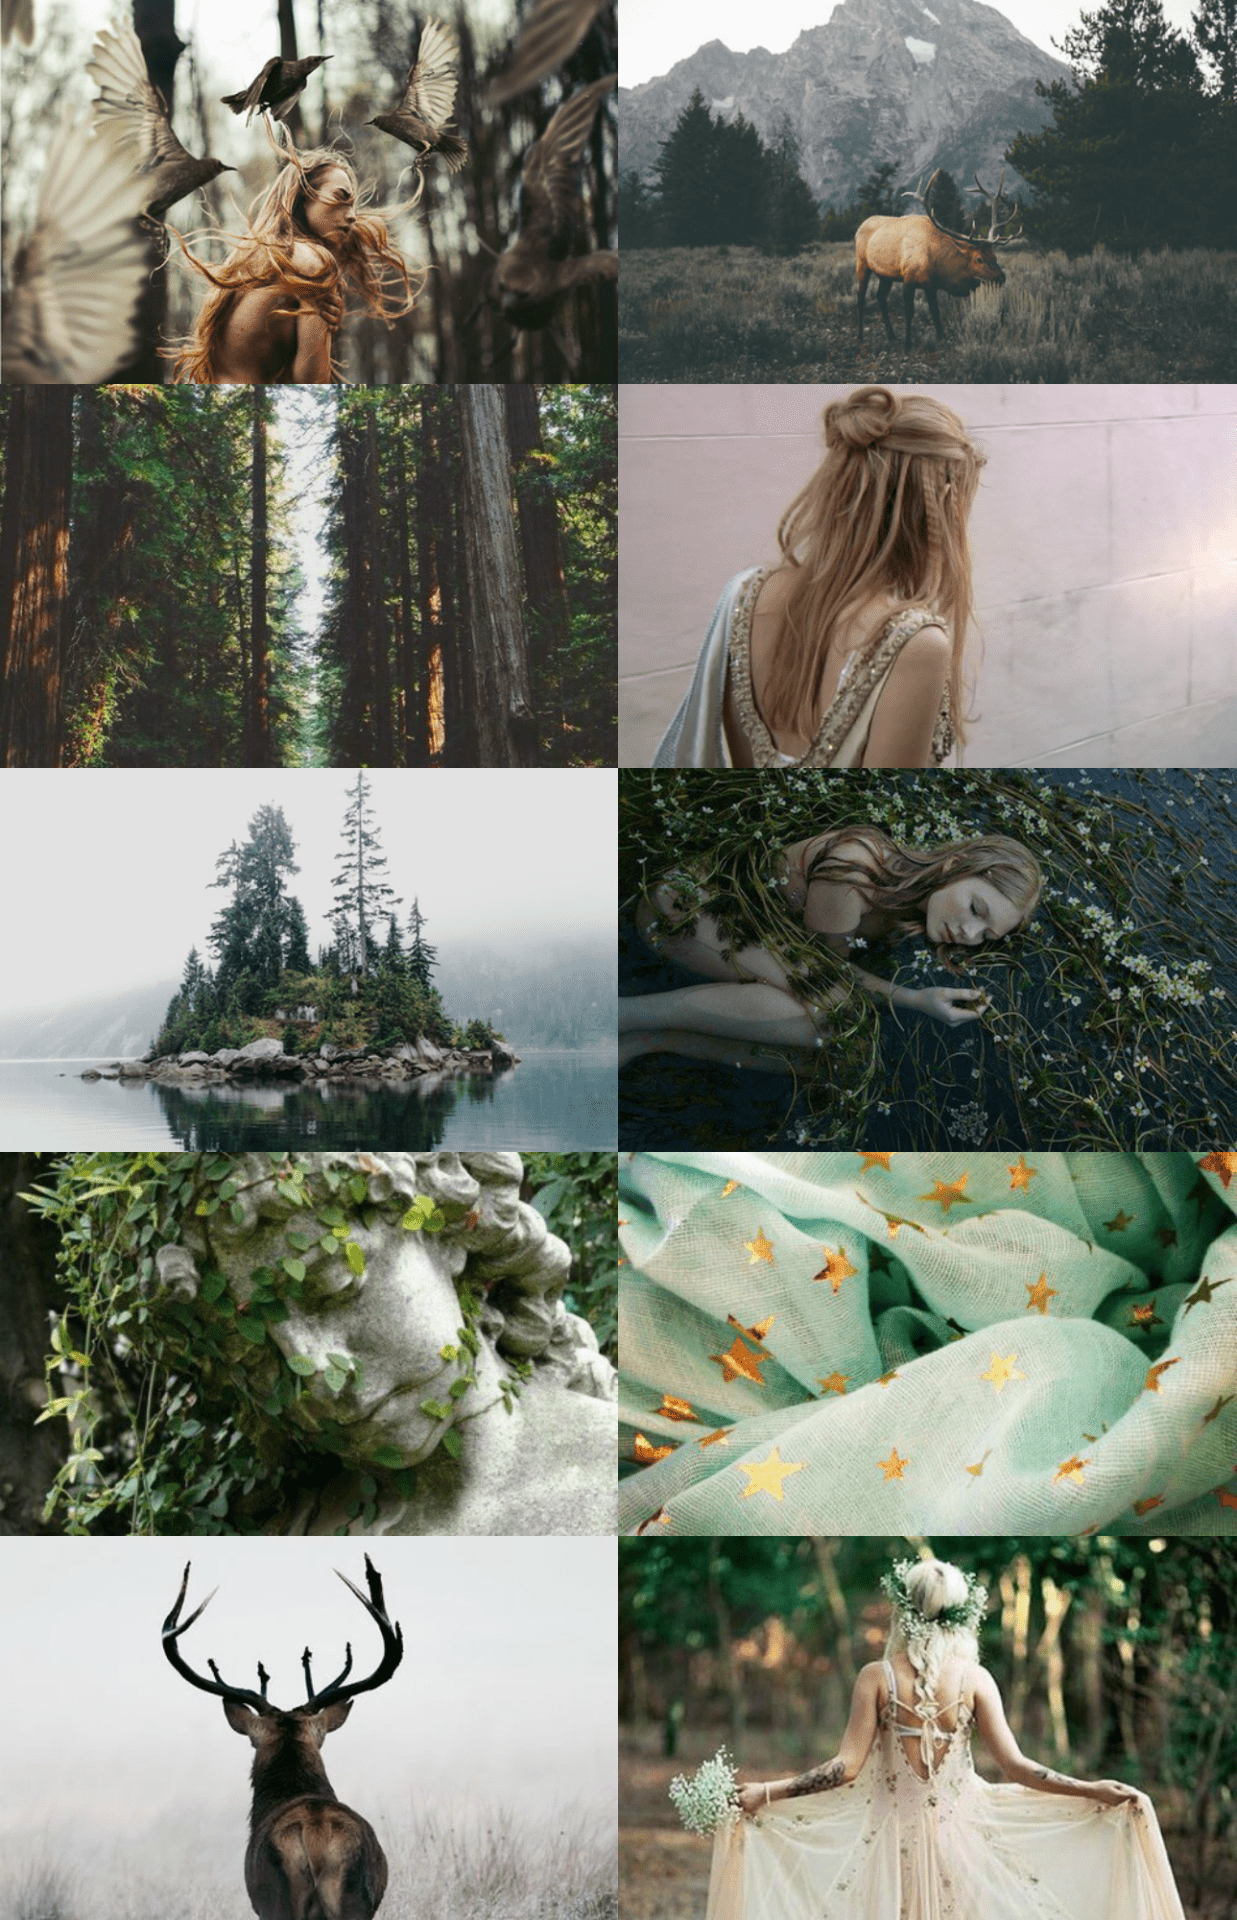 A collage of pictures with different scenes - Artemis